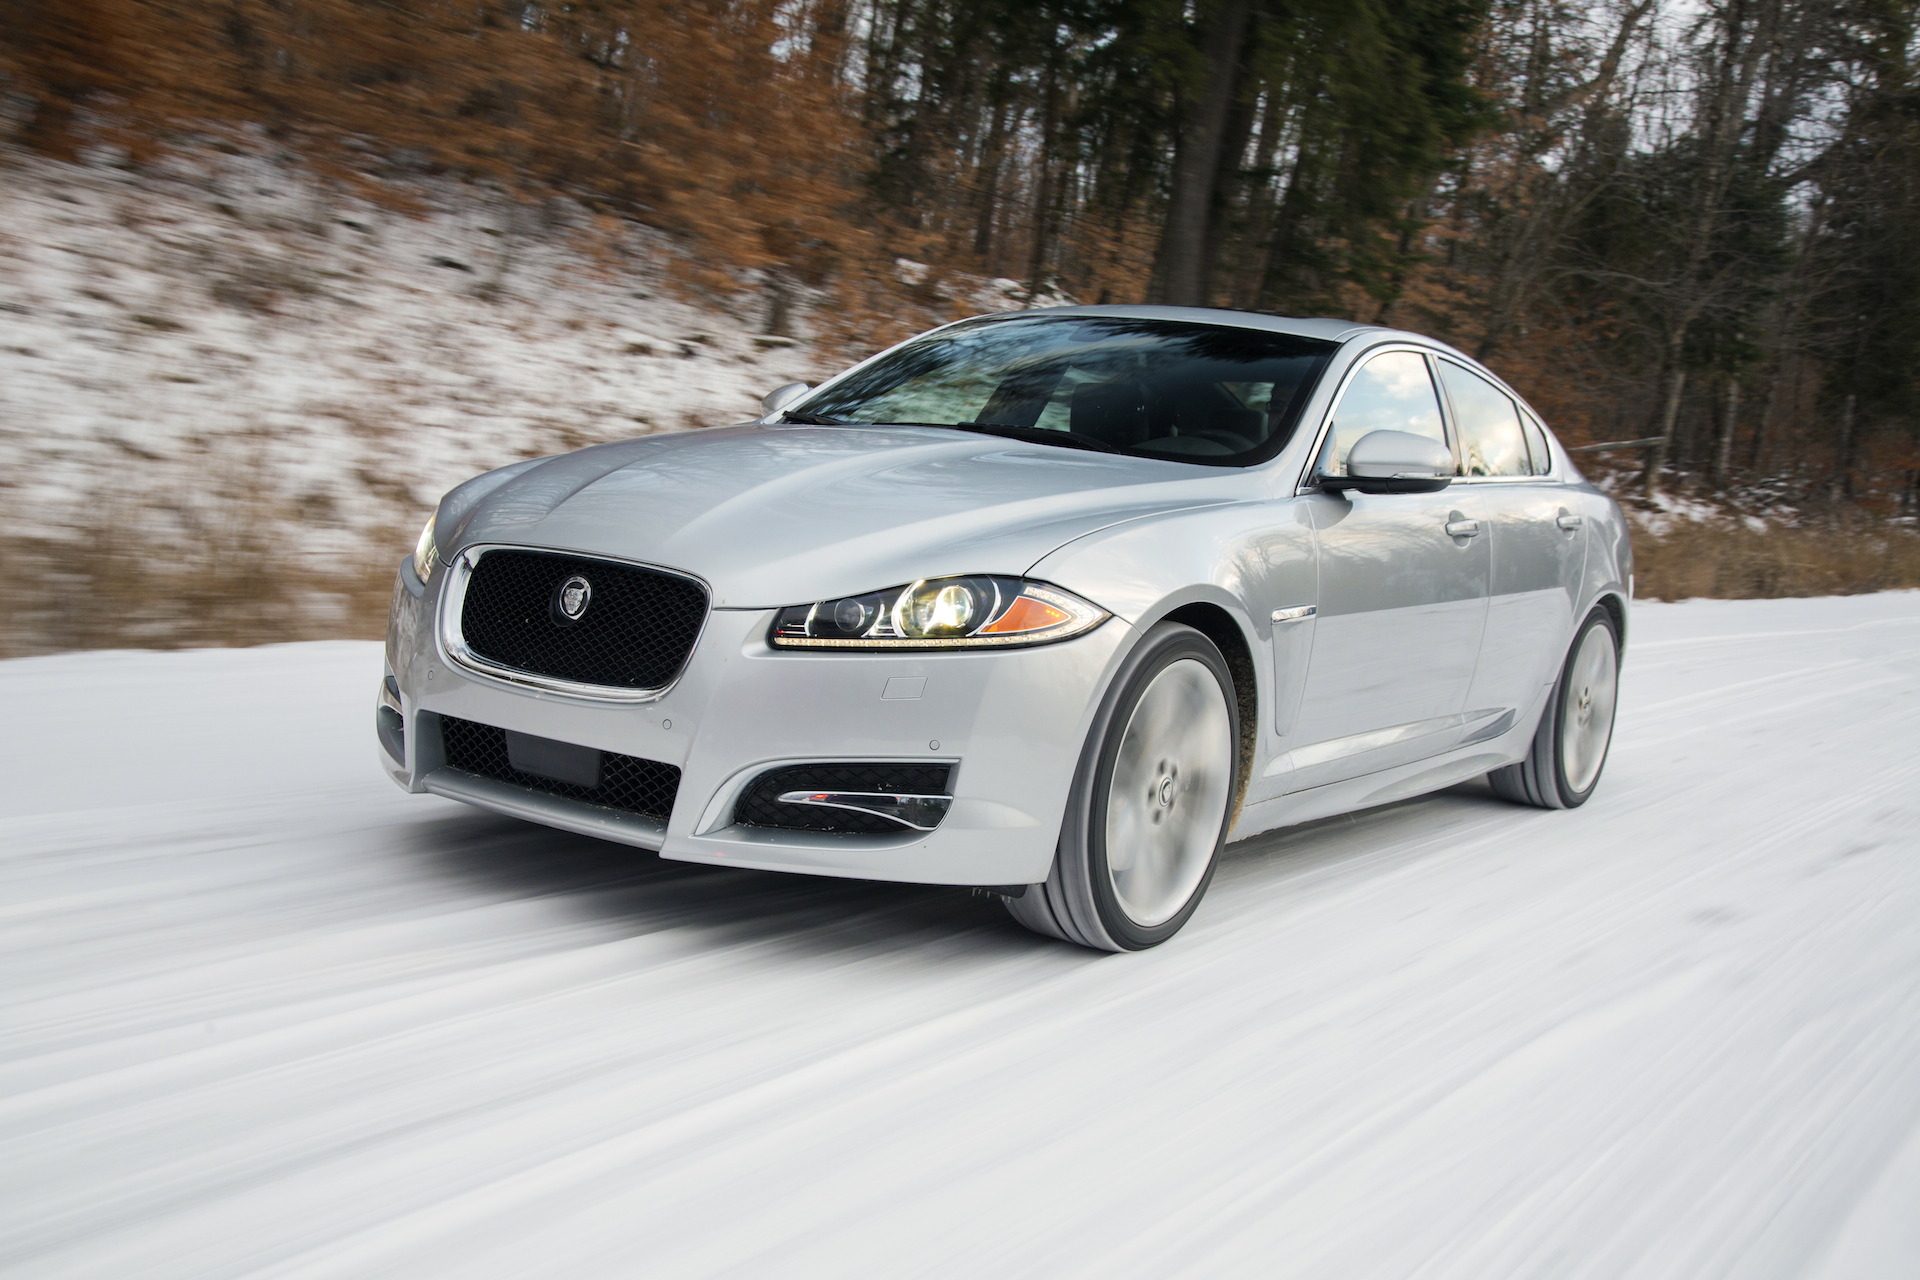 Jaguar XF Review, Ratings, Specs, Prices, and Photo Car Connection